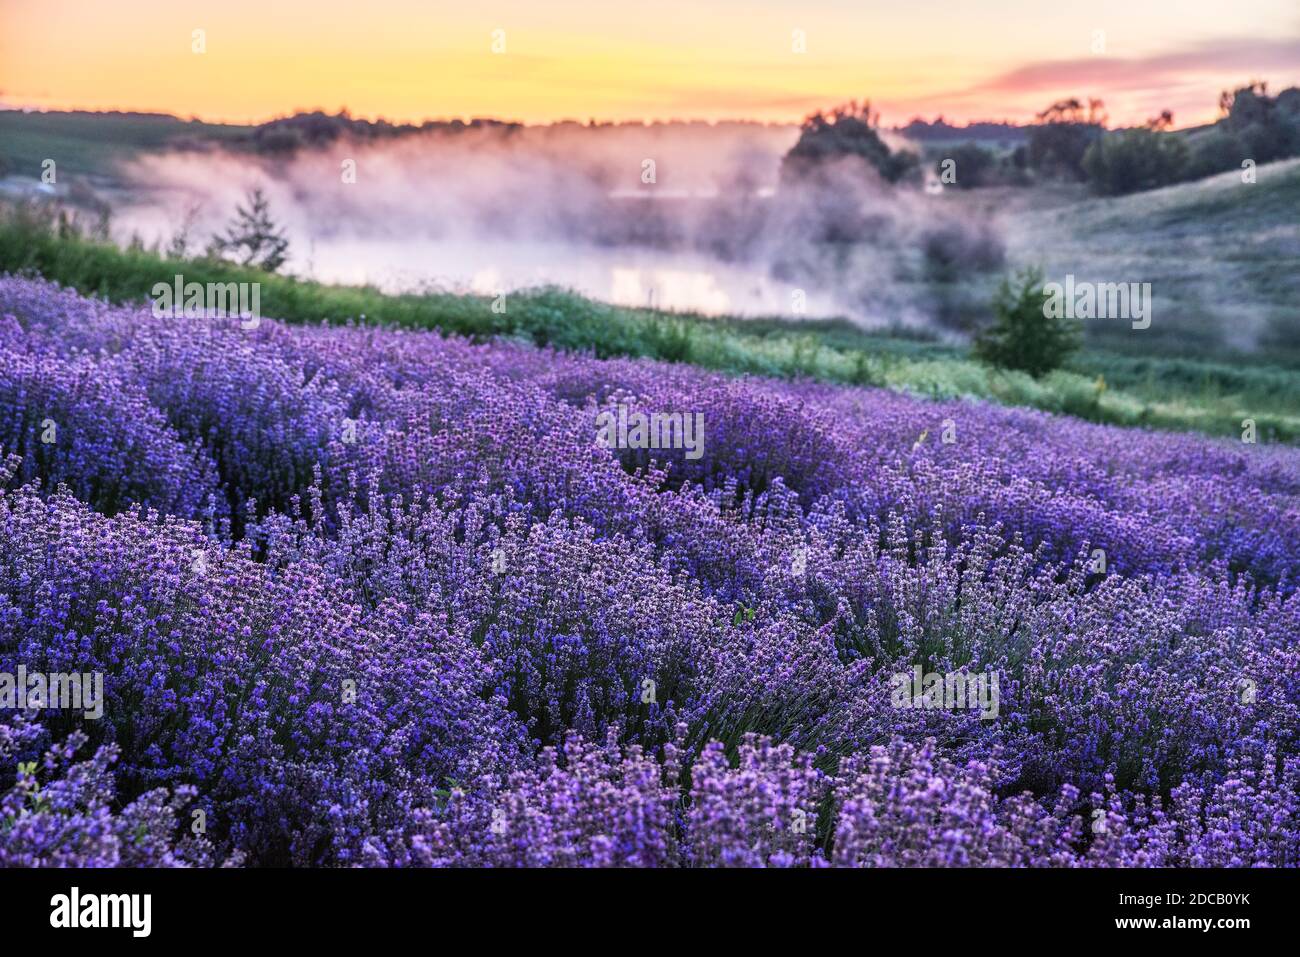 Lavender Mist High Resolution Stock Photography and Images - Alamy